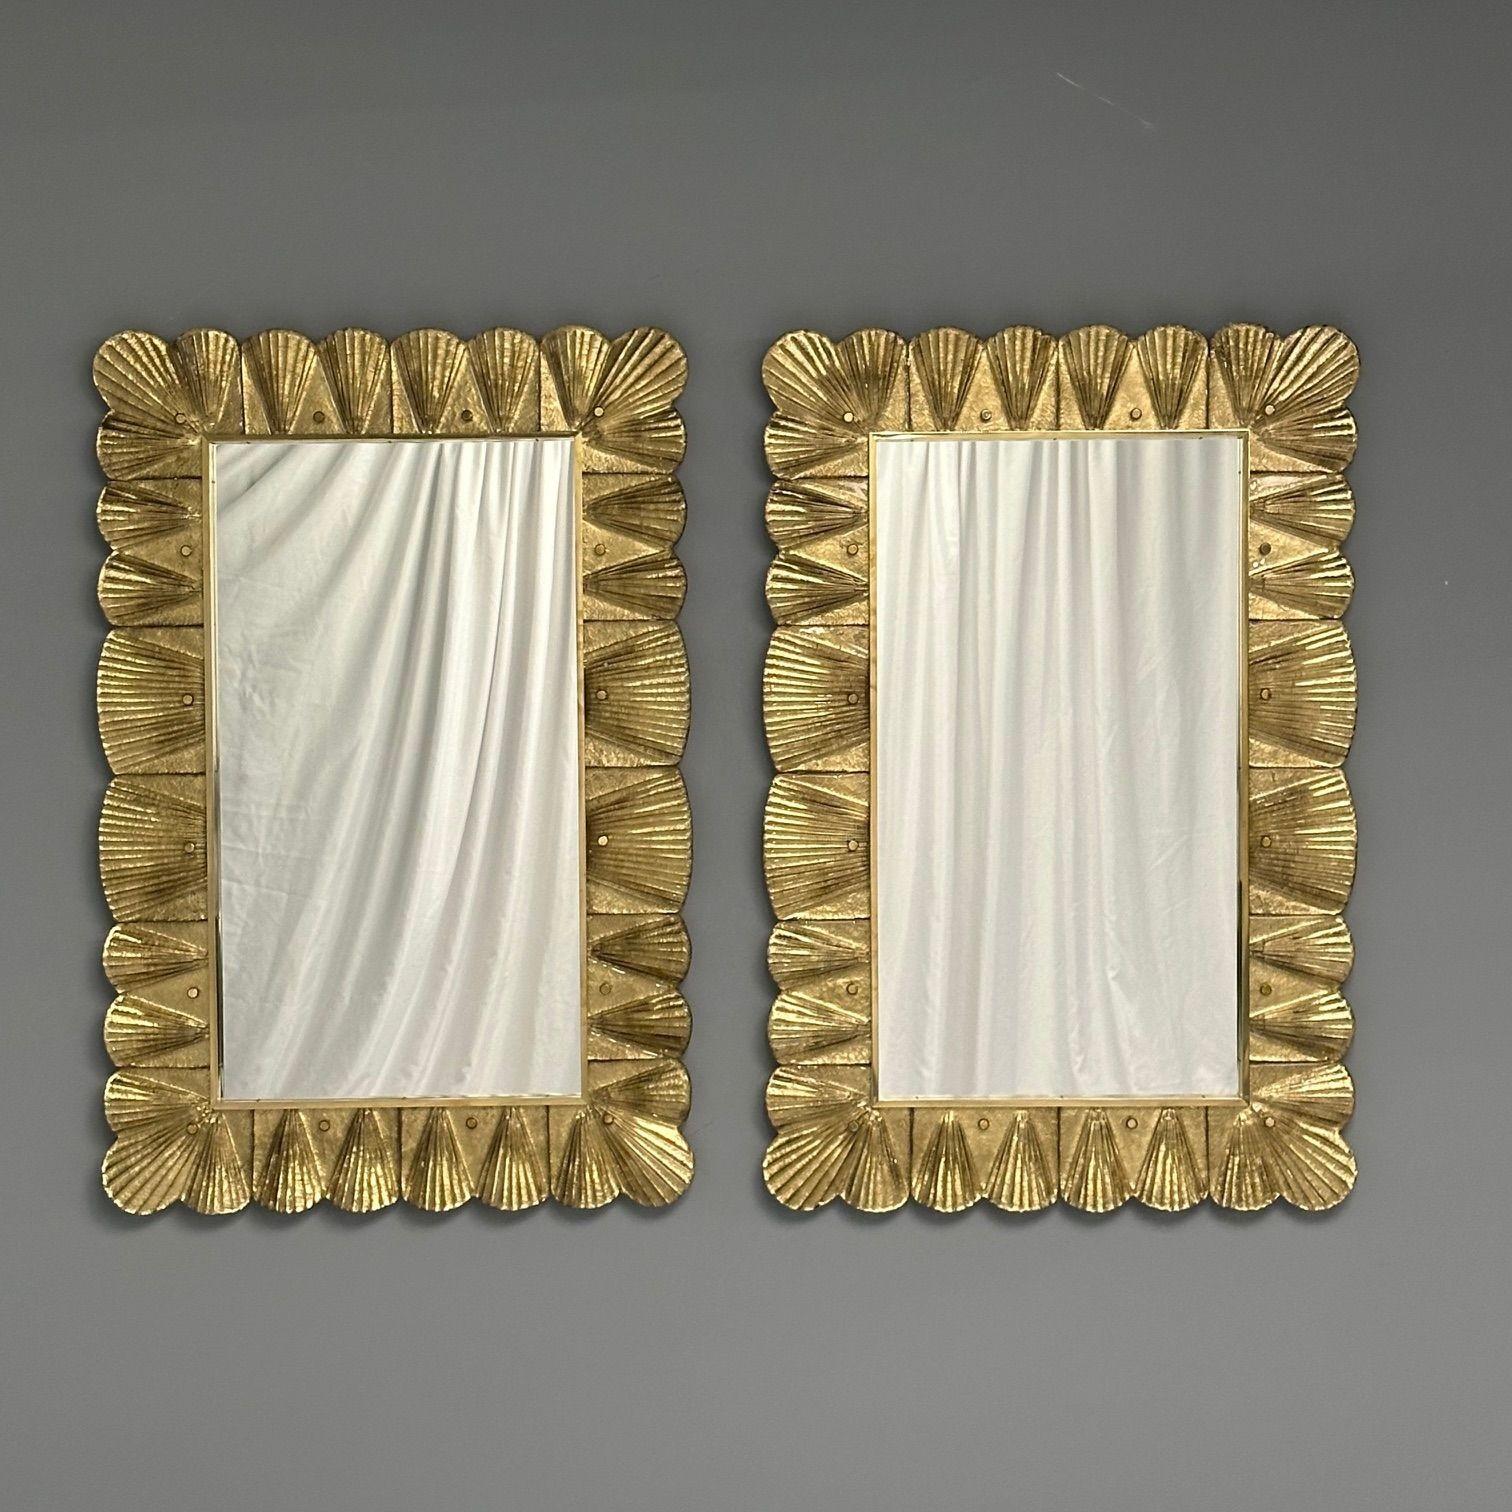 Modern Contemporary, Wall Mirrors, Scallop Motif, Murano Glass, Gold Gilt, Italy, 2023 For Sale